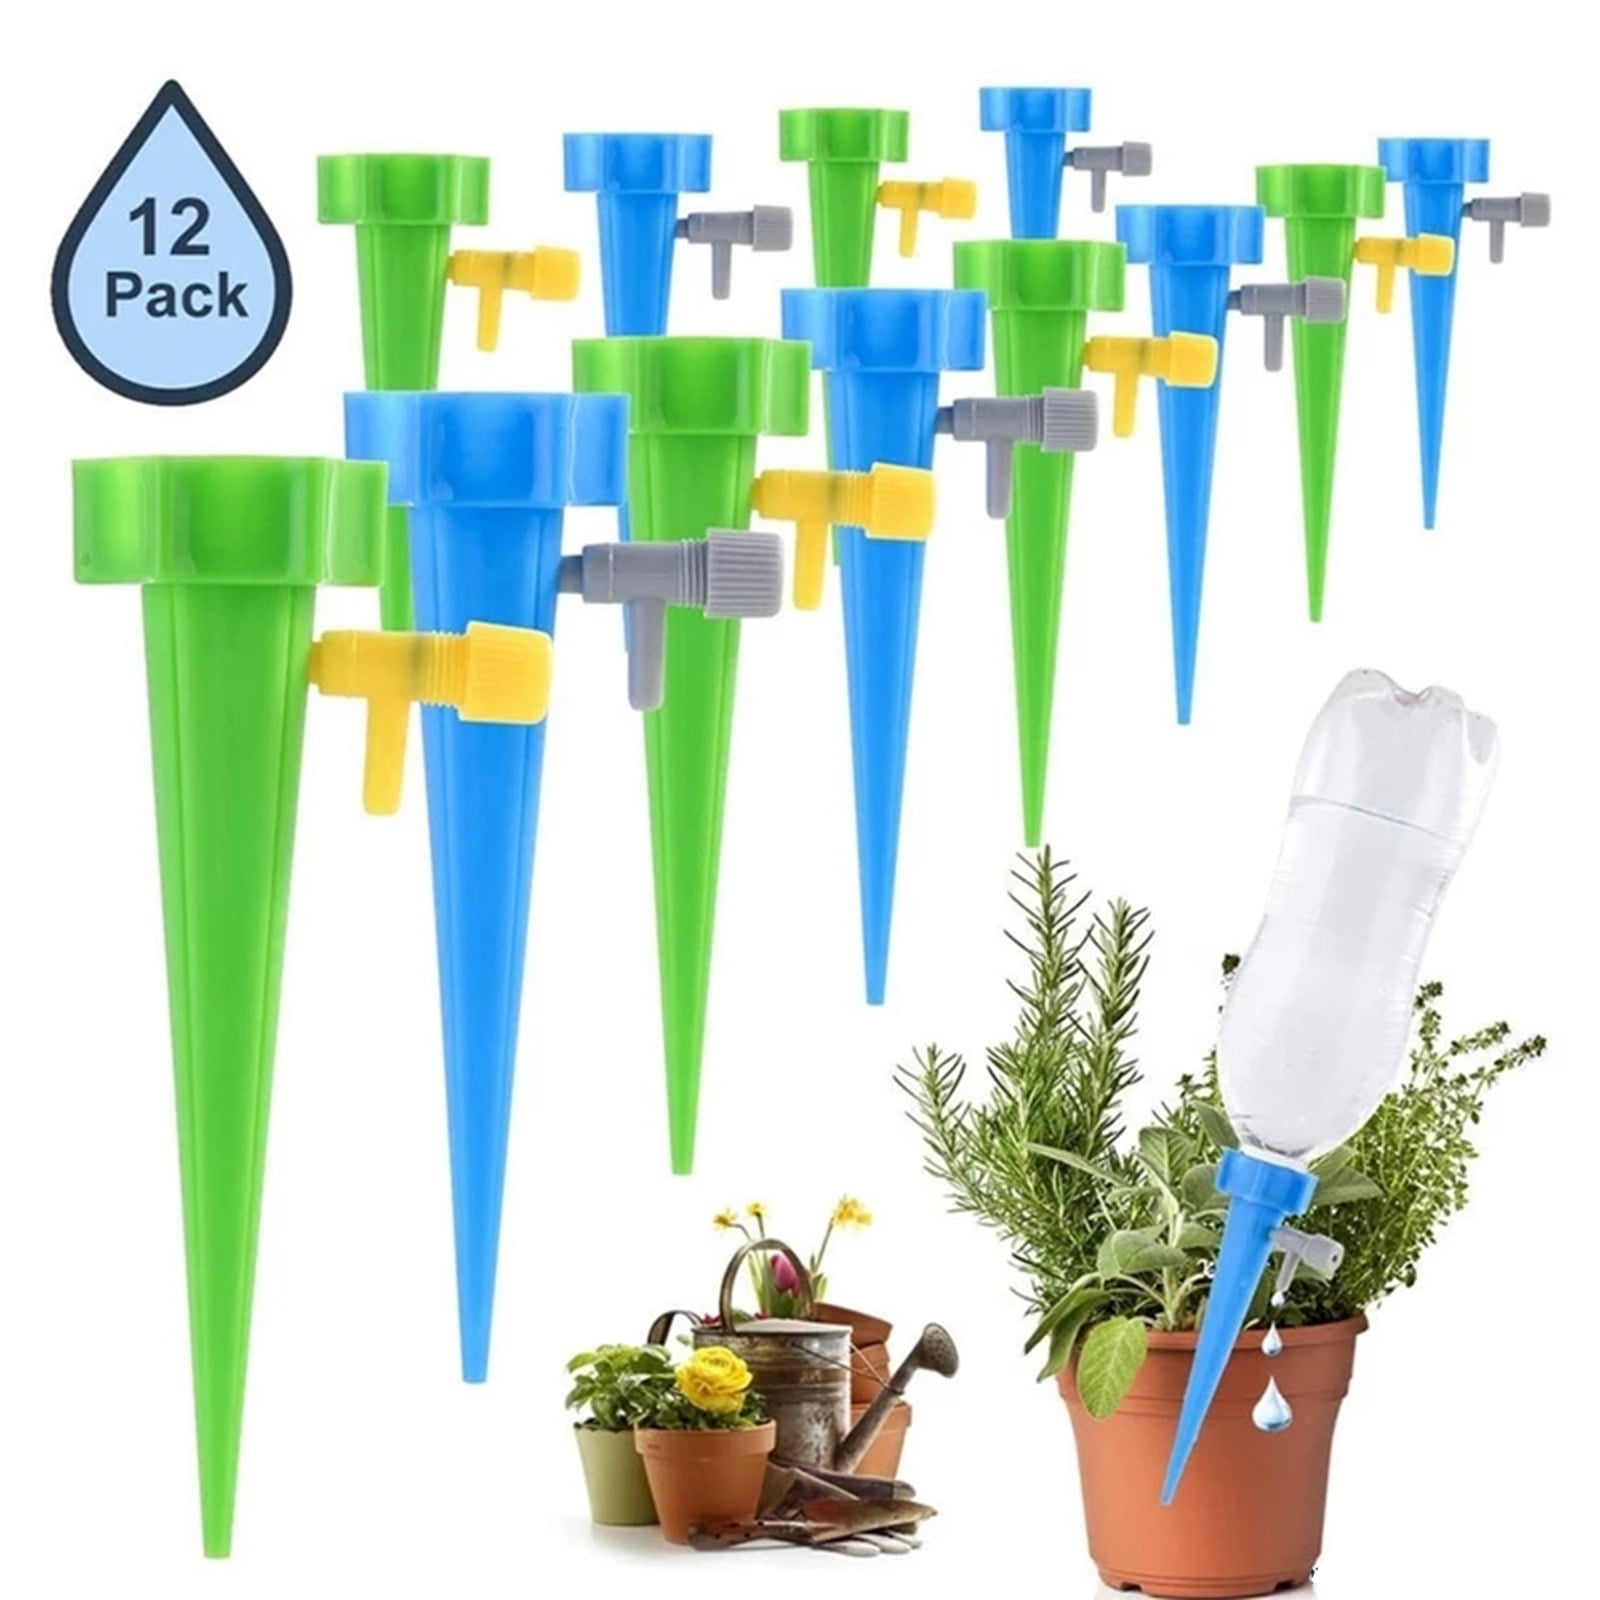 12 Plant Water Control Drip Cone Spike Waterer Bottle Irrigation System Durable 